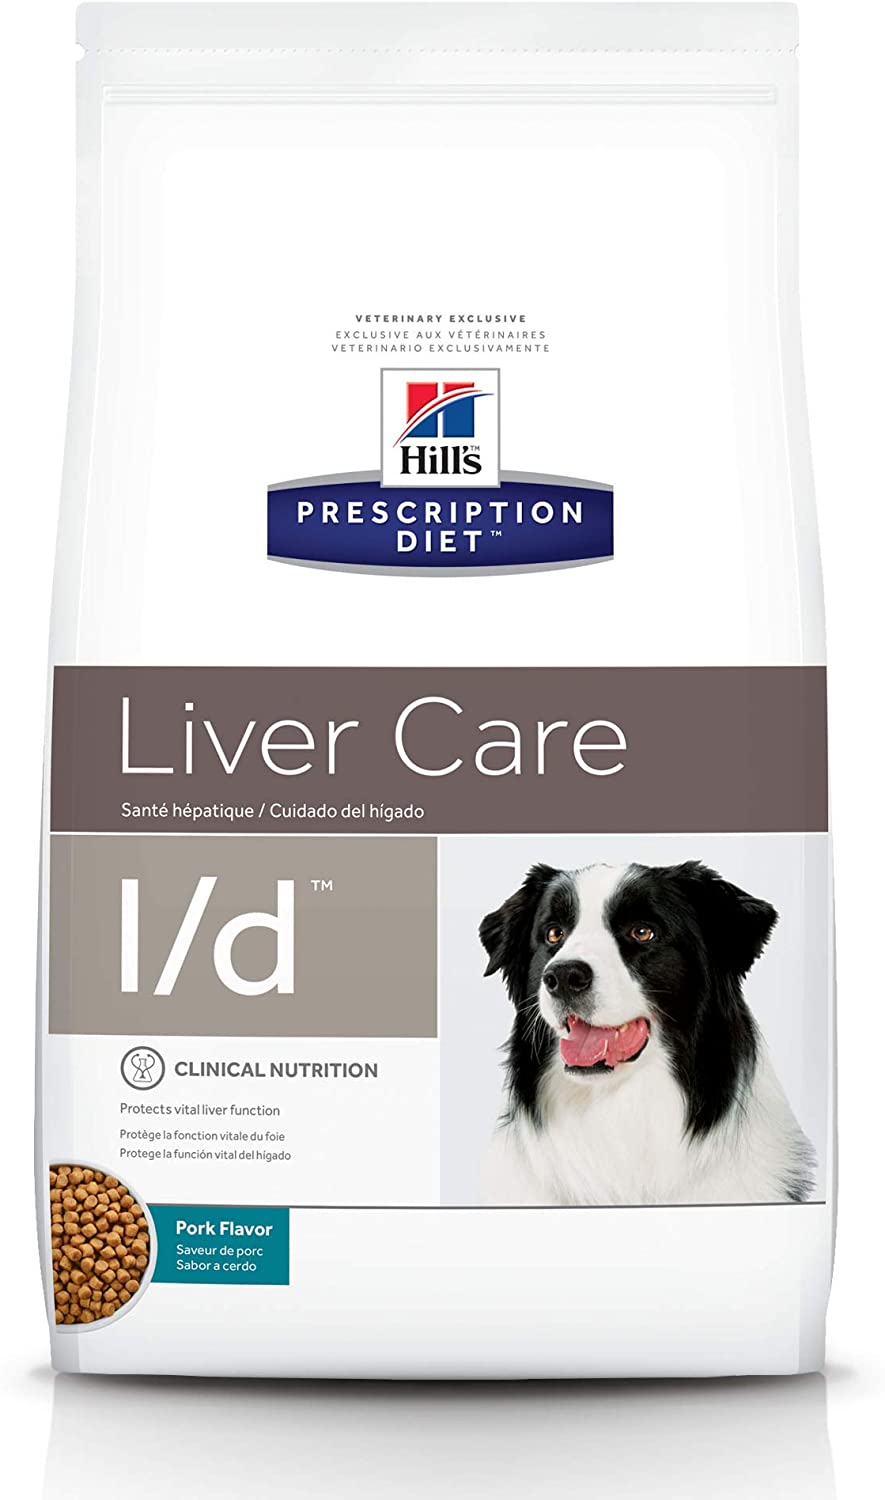 Best Dog Food For Liver Problems - Best Protection Dogs